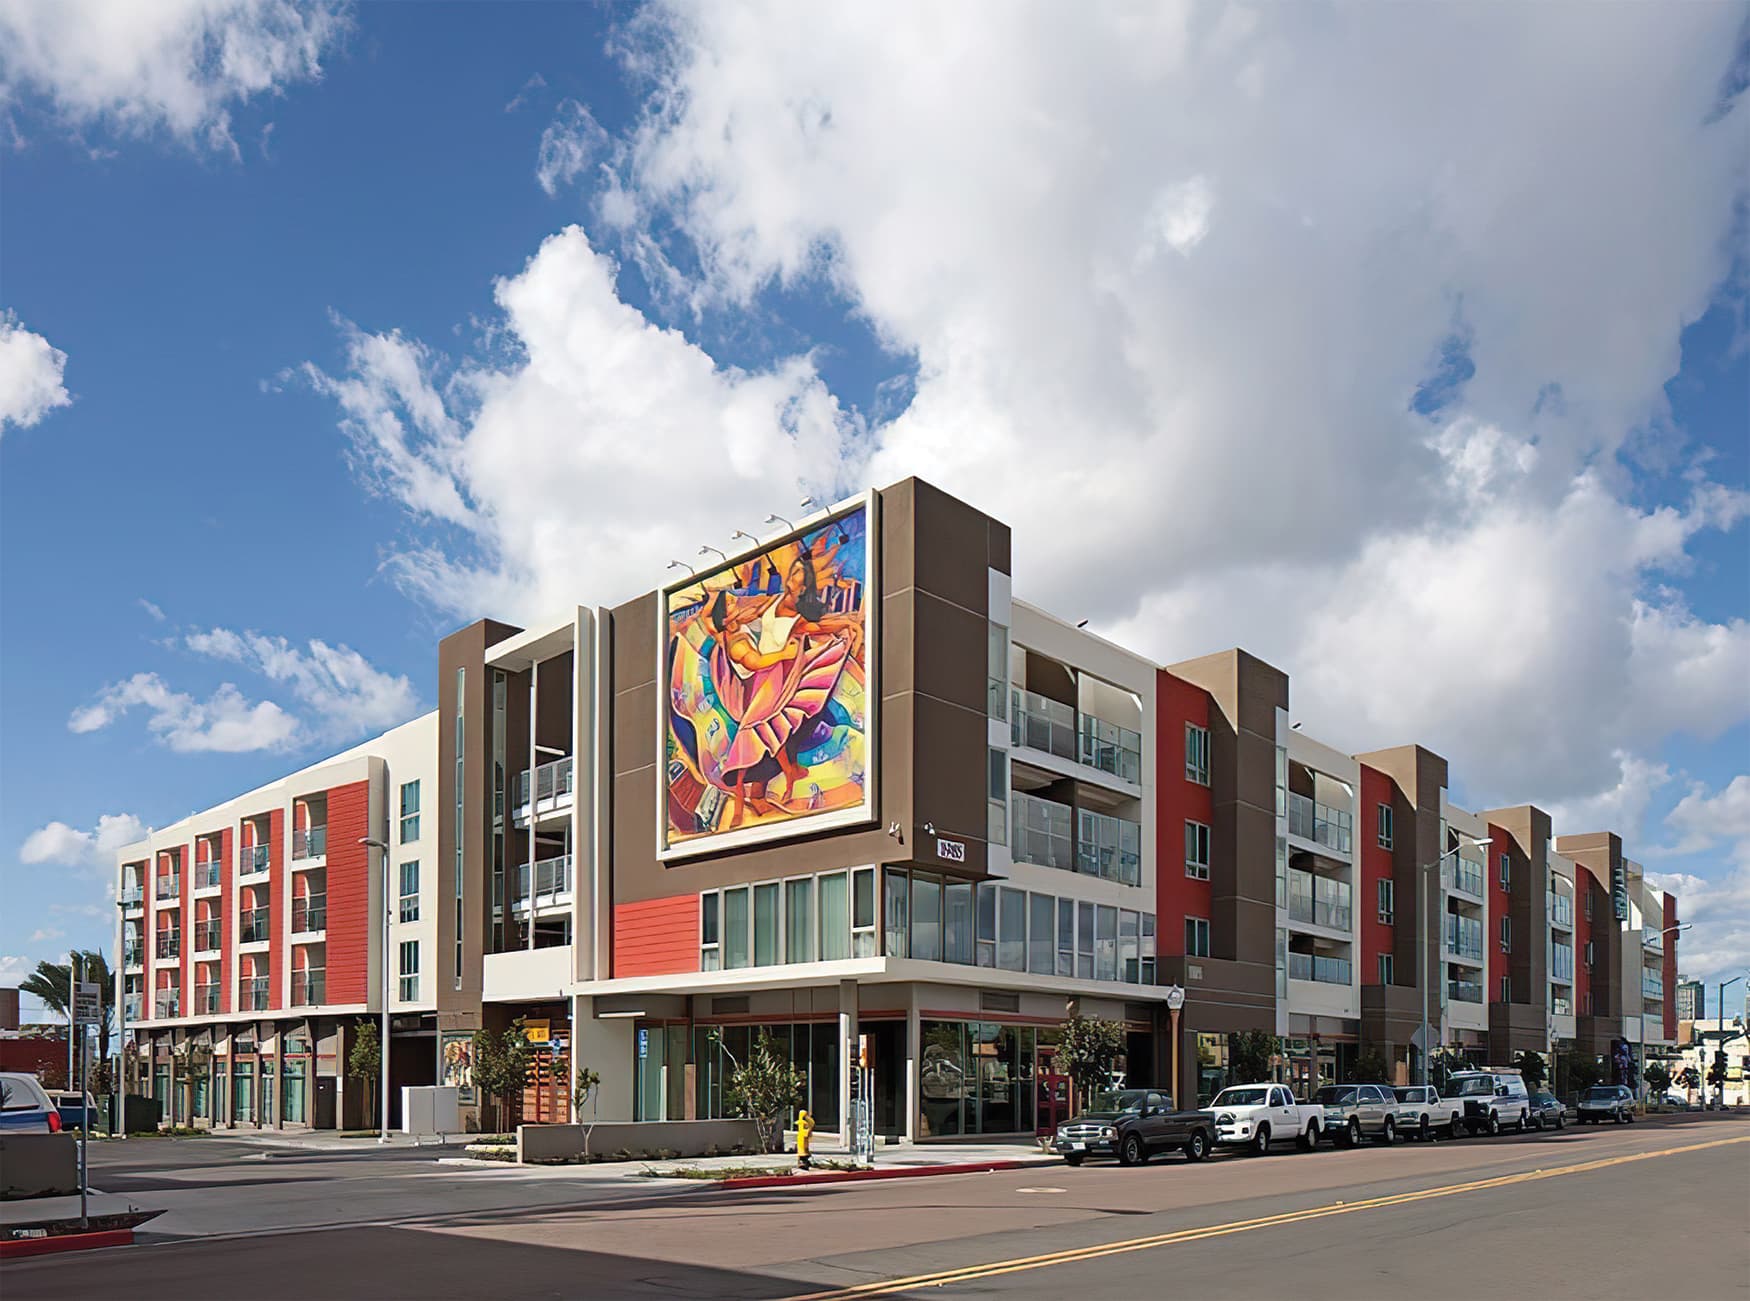 RSM Design worked with Shea Properties to prepare wayfinding signage, environmental graphics, and placemaking elements for Mercado del Barrio, a residential and commercial mixed-use development located in San Diego, California. Public Art.